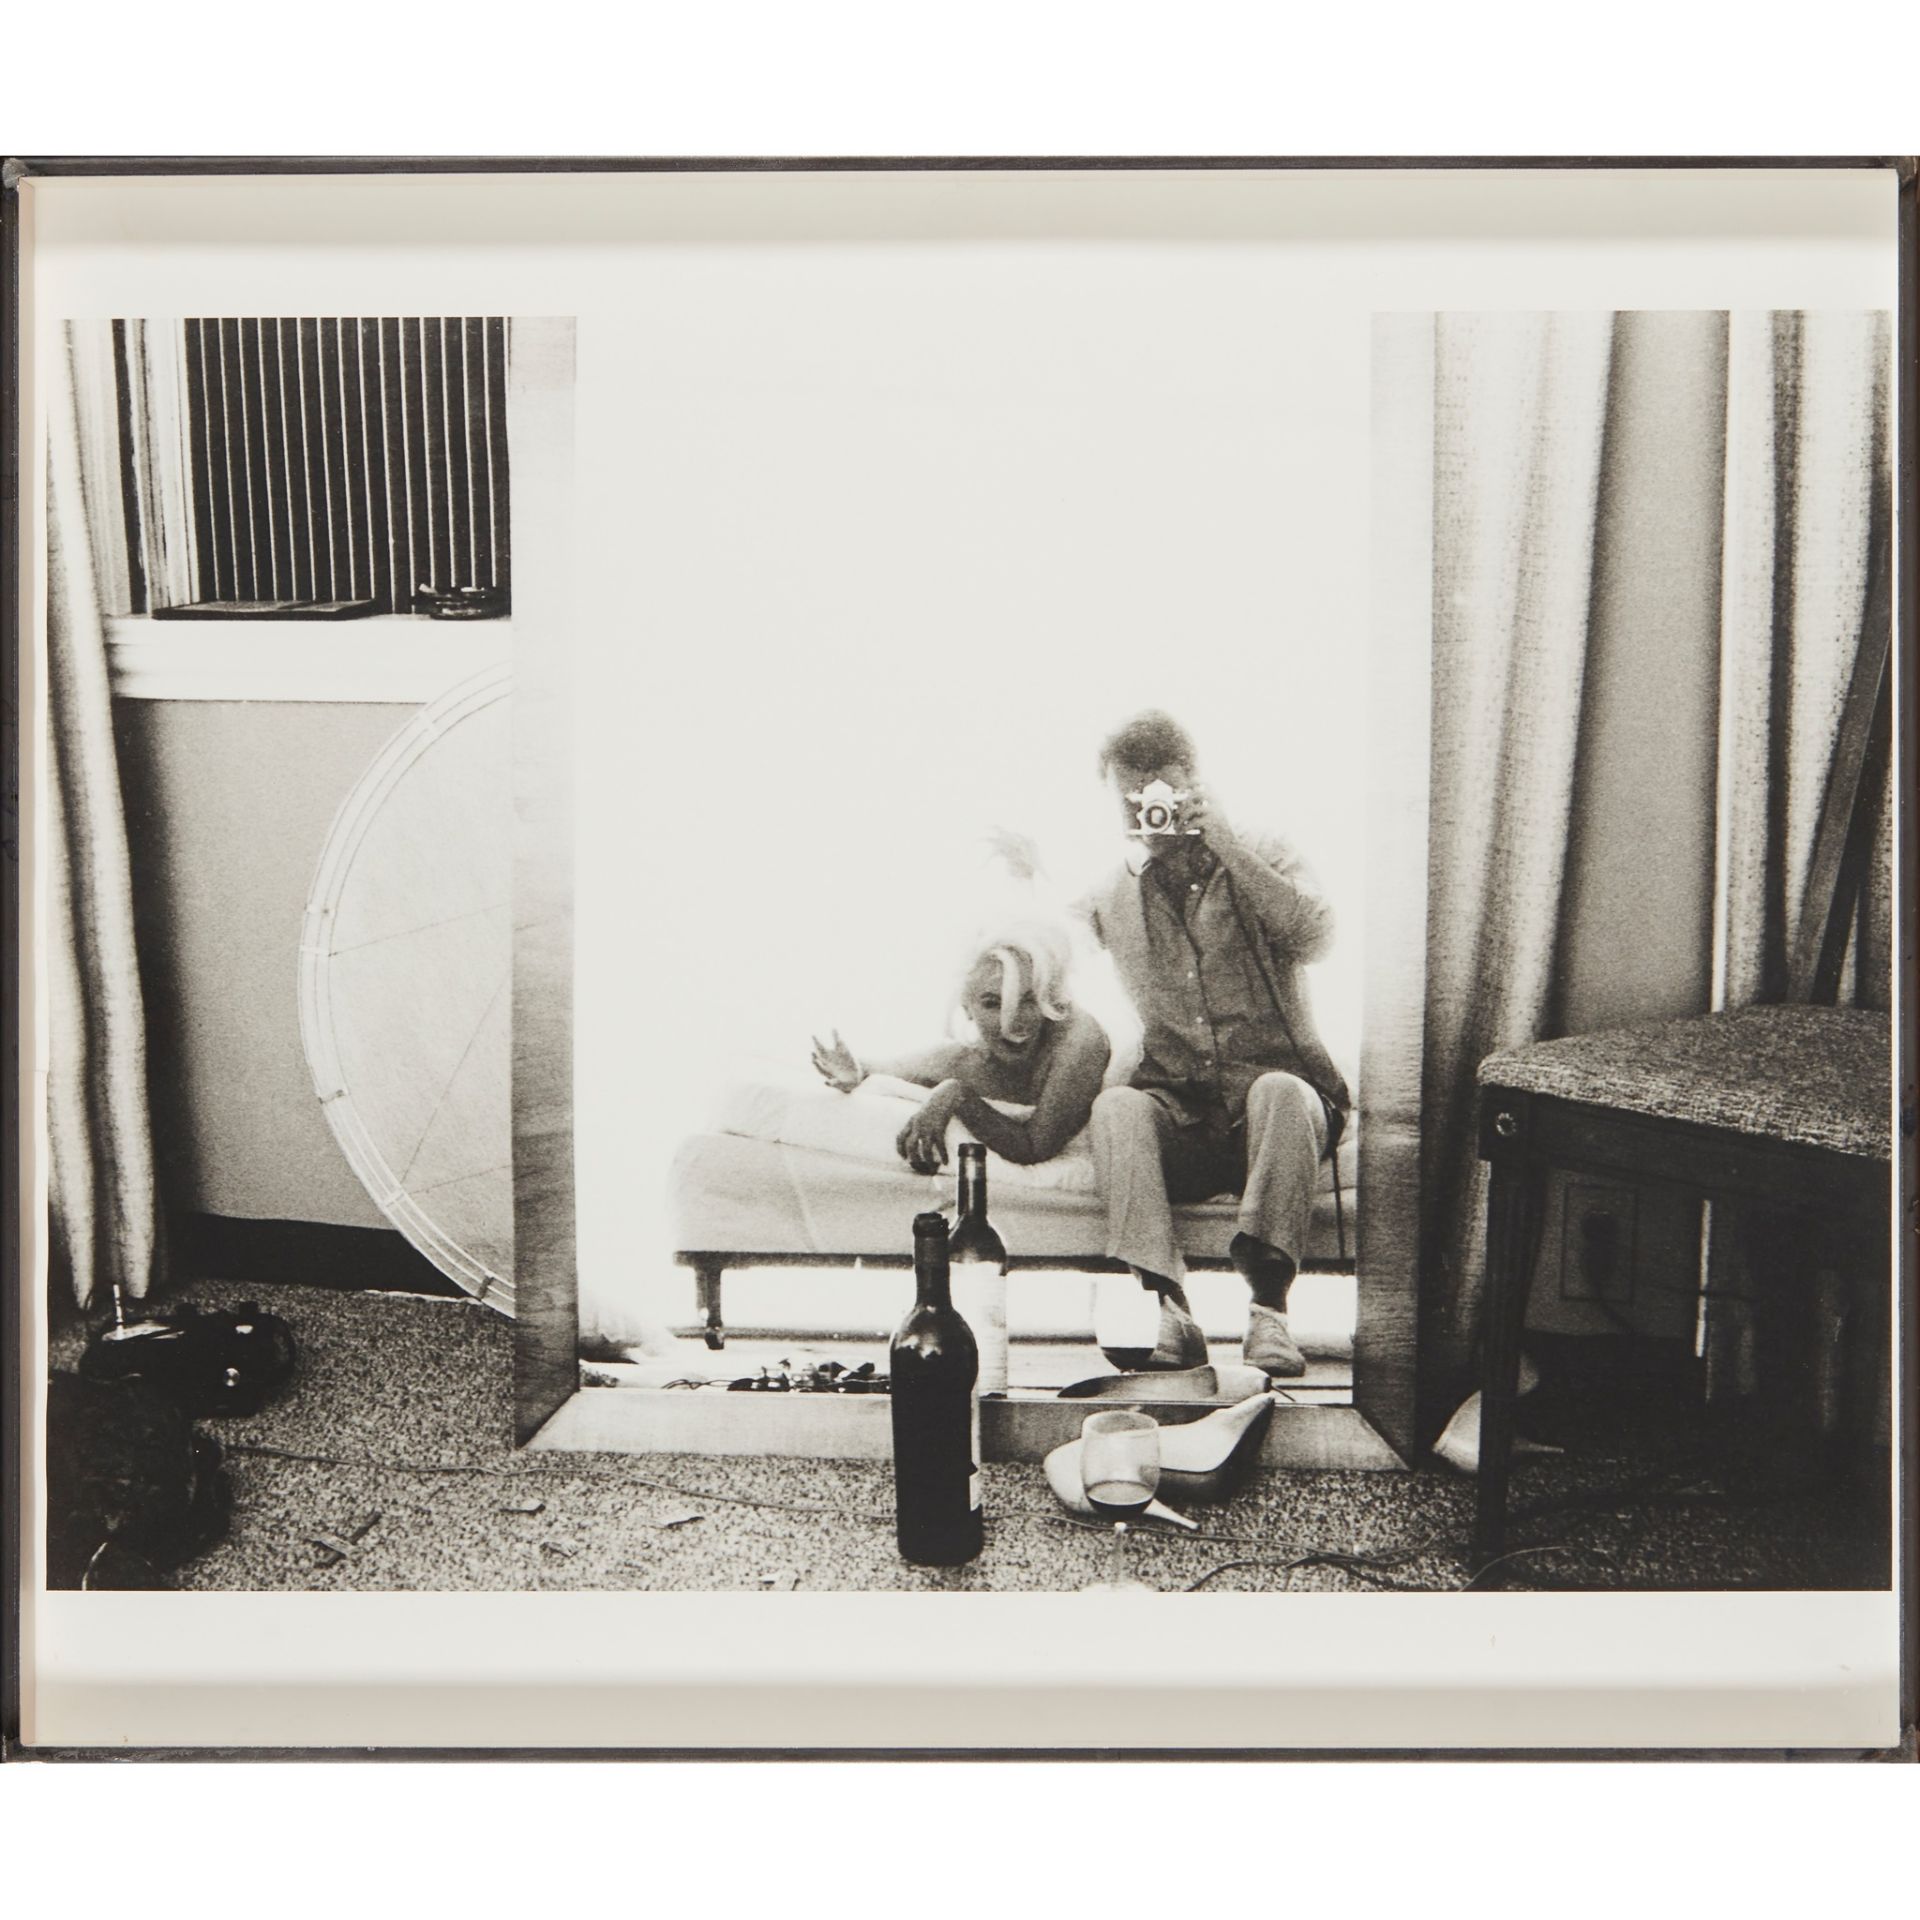 BERT STERN (AMERICAN 1929-2013) SELF-PORTRAIT WITH MARILYN MONROE (FROM THE LAST SITTING) - 1962 - Image 2 of 3